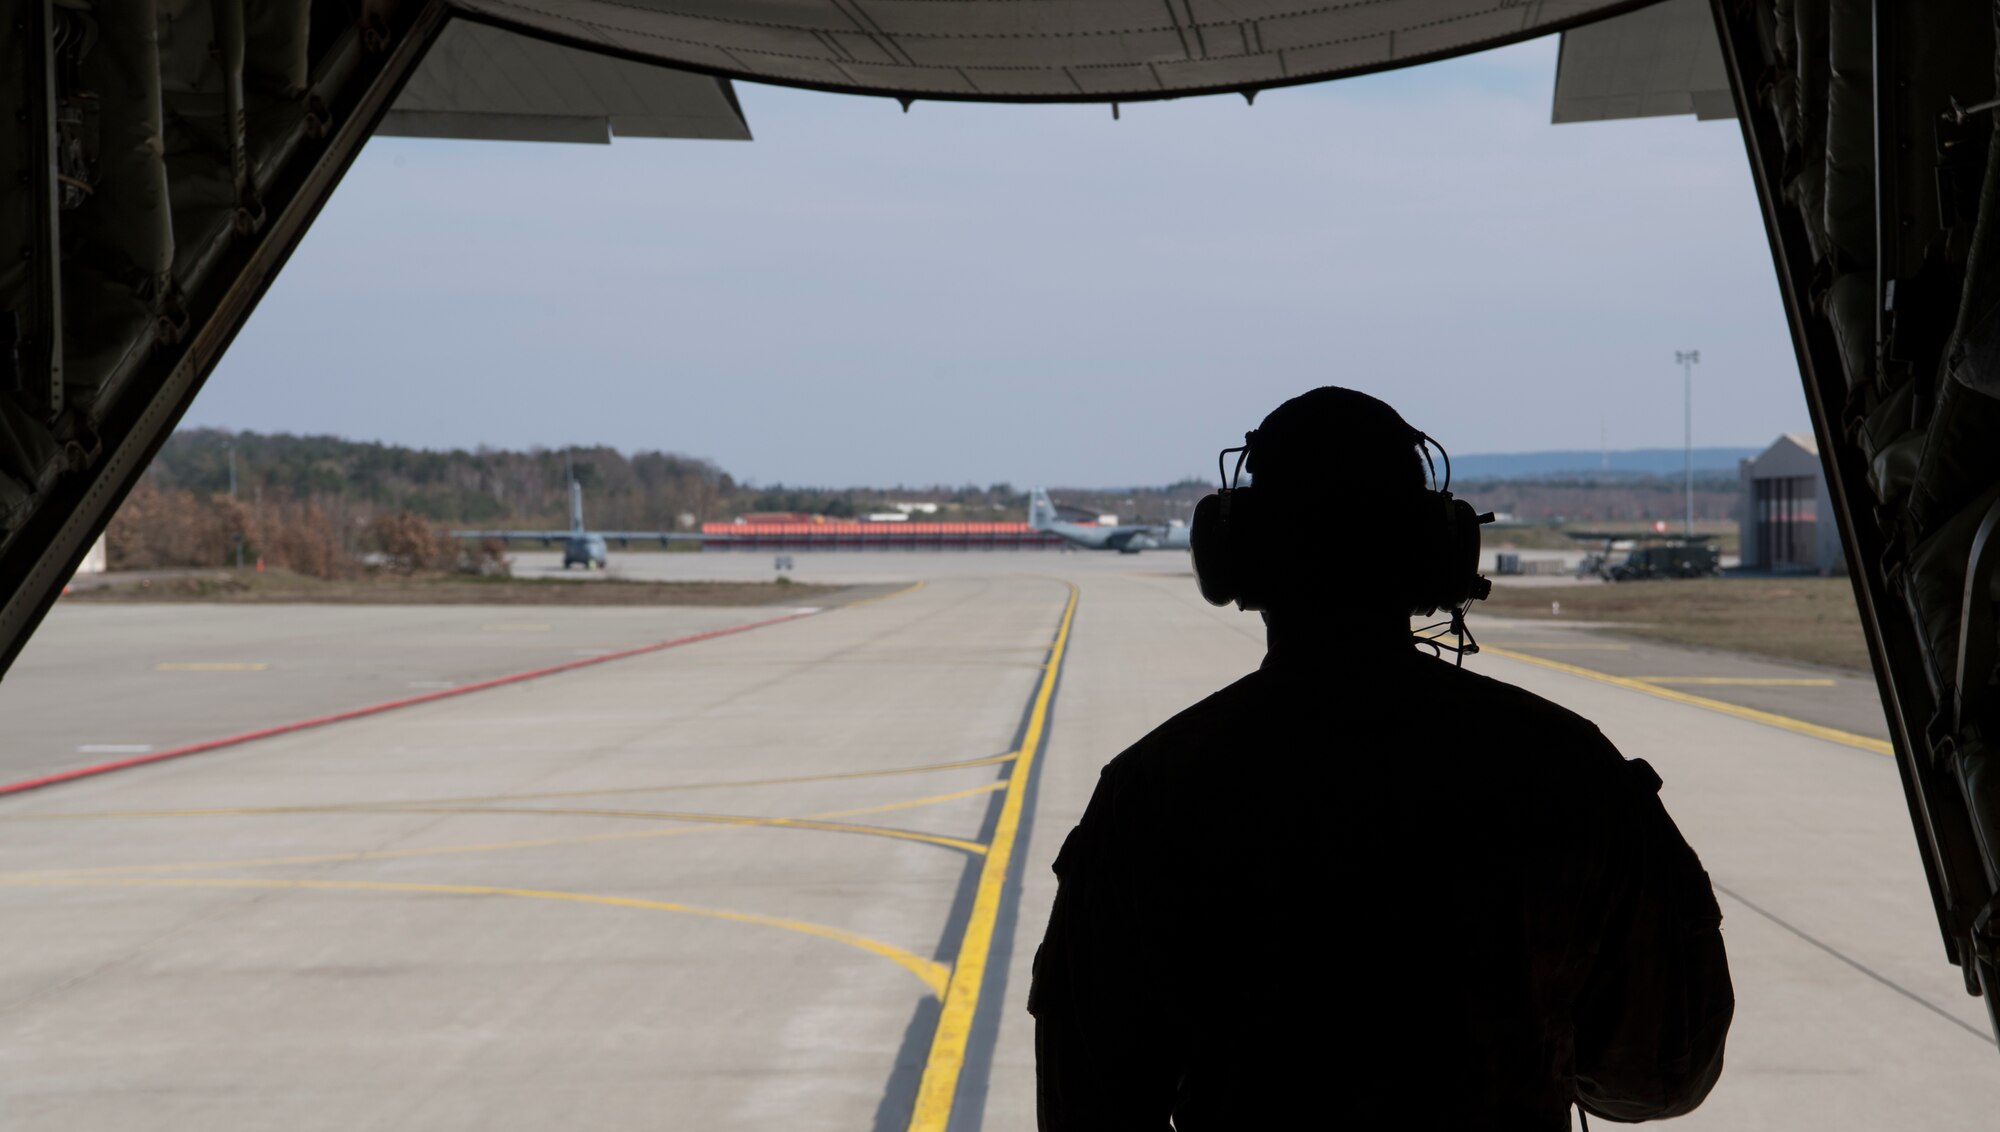 U.S. Air Force Staff Sgt. Brian Clark, 37th Airlift Squadron loadmaster, stares out the back of a C-130J Super Hercules aircraft at Ramstein Air Base, Germany, March 26, 2020.